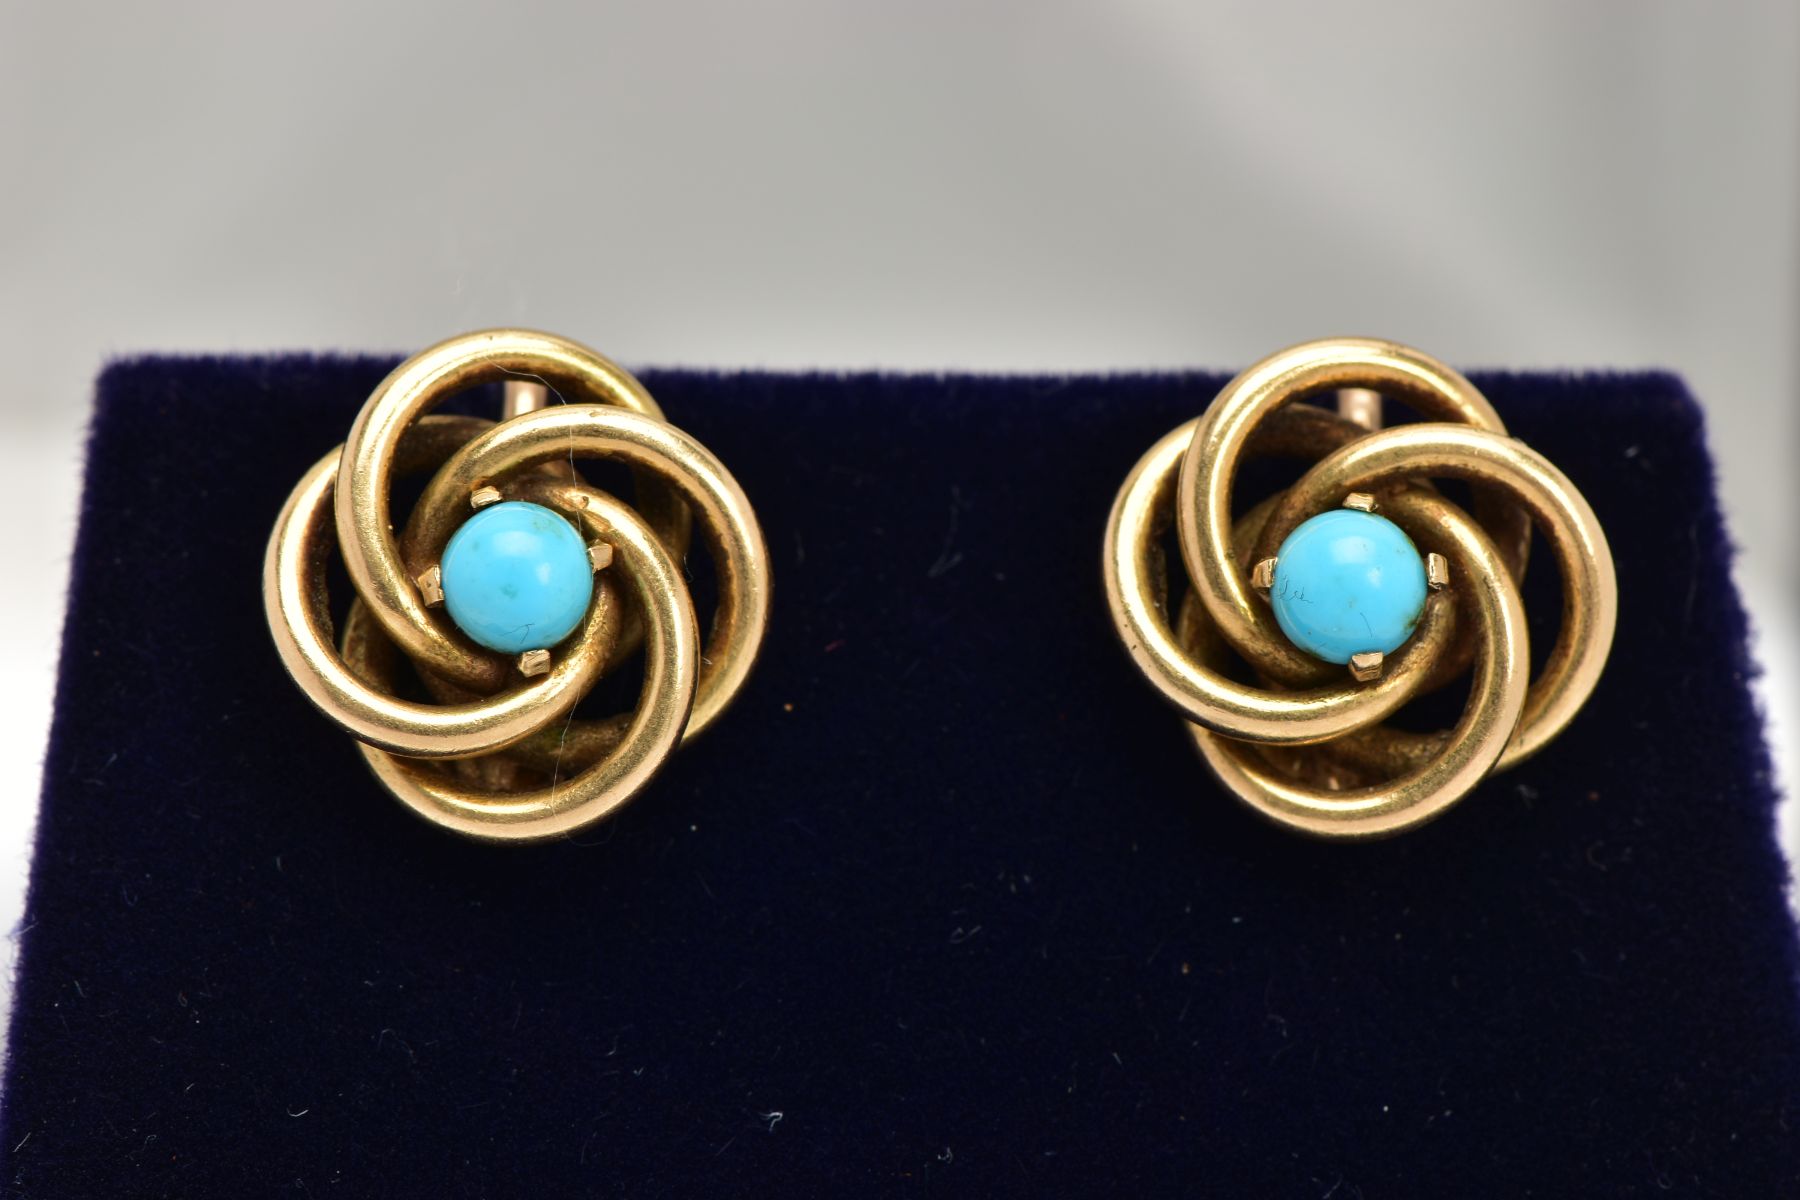 A PAIR OF EARRINGS, of interlocking circular design each set with a central turquoise cabochon, with